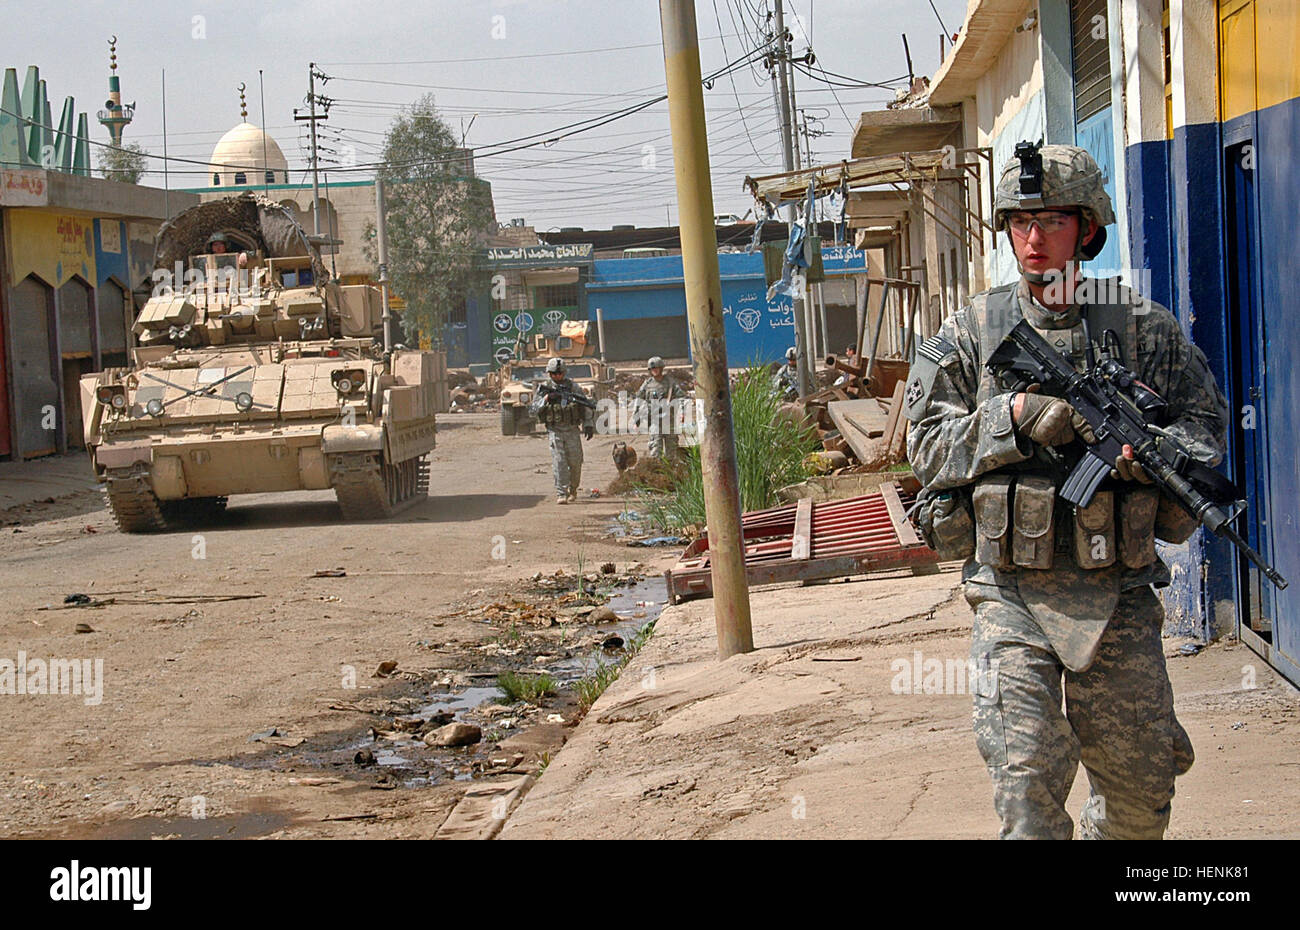 Pfc. Adam Devries, an infantry Soldier in 1st Platoon, Company D, 1st Battalion, 8th Infantry Regiment from Fort Carson, Colo., patrols the streets of Mosul, April 1, with members of his company under as a Bradley Armored Personnel Carrier moves along side providing security. Iraqi Army Division led raid on Mosul neighborhood finds car bomb factory 83278 Stock Photo